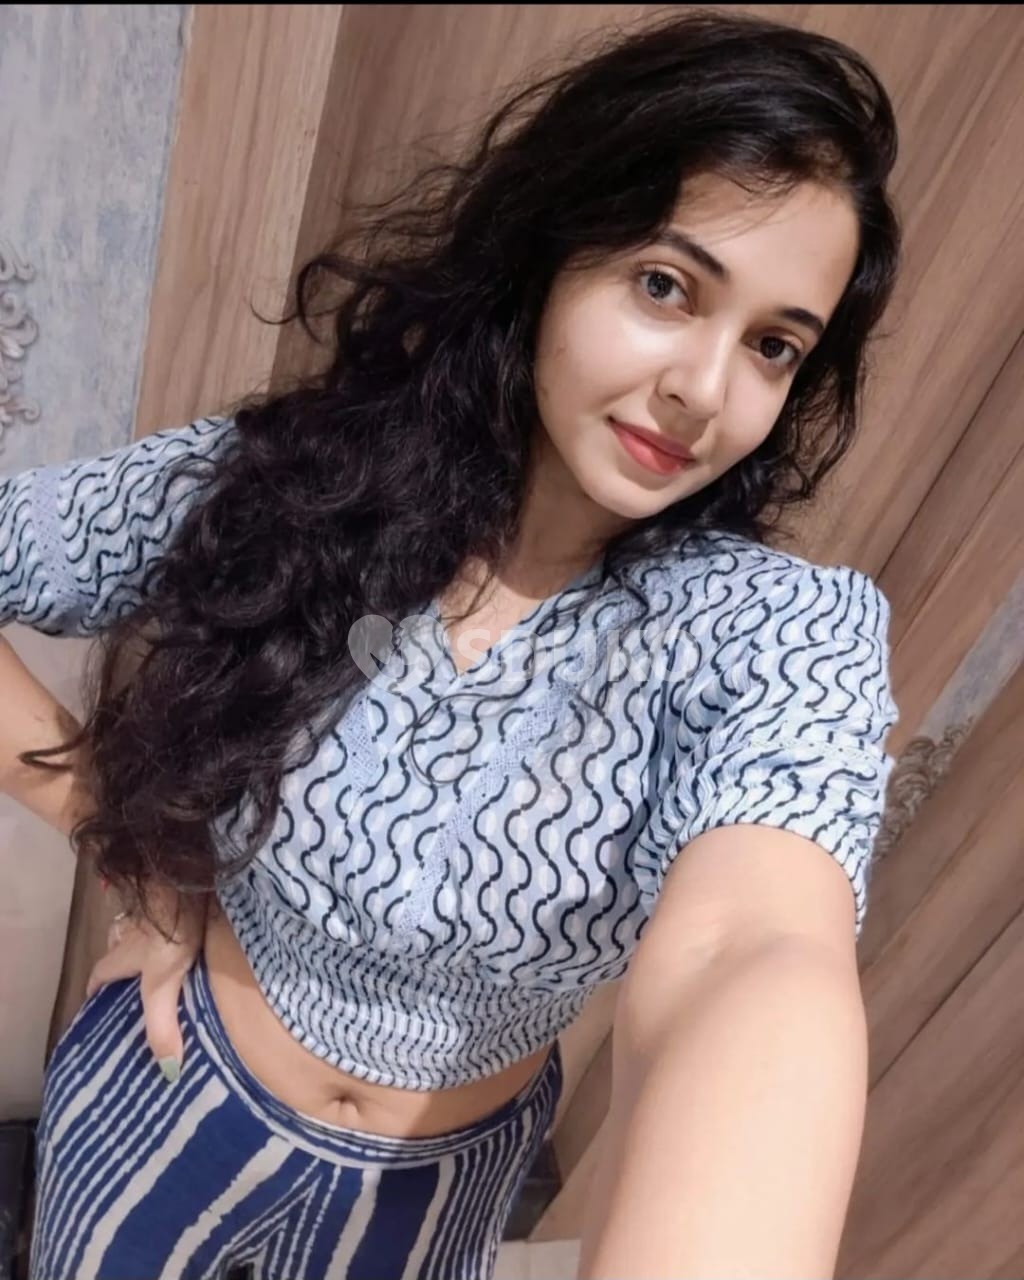 Wagholi ✅ 24x7 AFFORDABLE CHEAPEST RATE SAFE CALL GIRL SERVICE AVAILABLE OUTCALL AVAILABLE.   .  ..